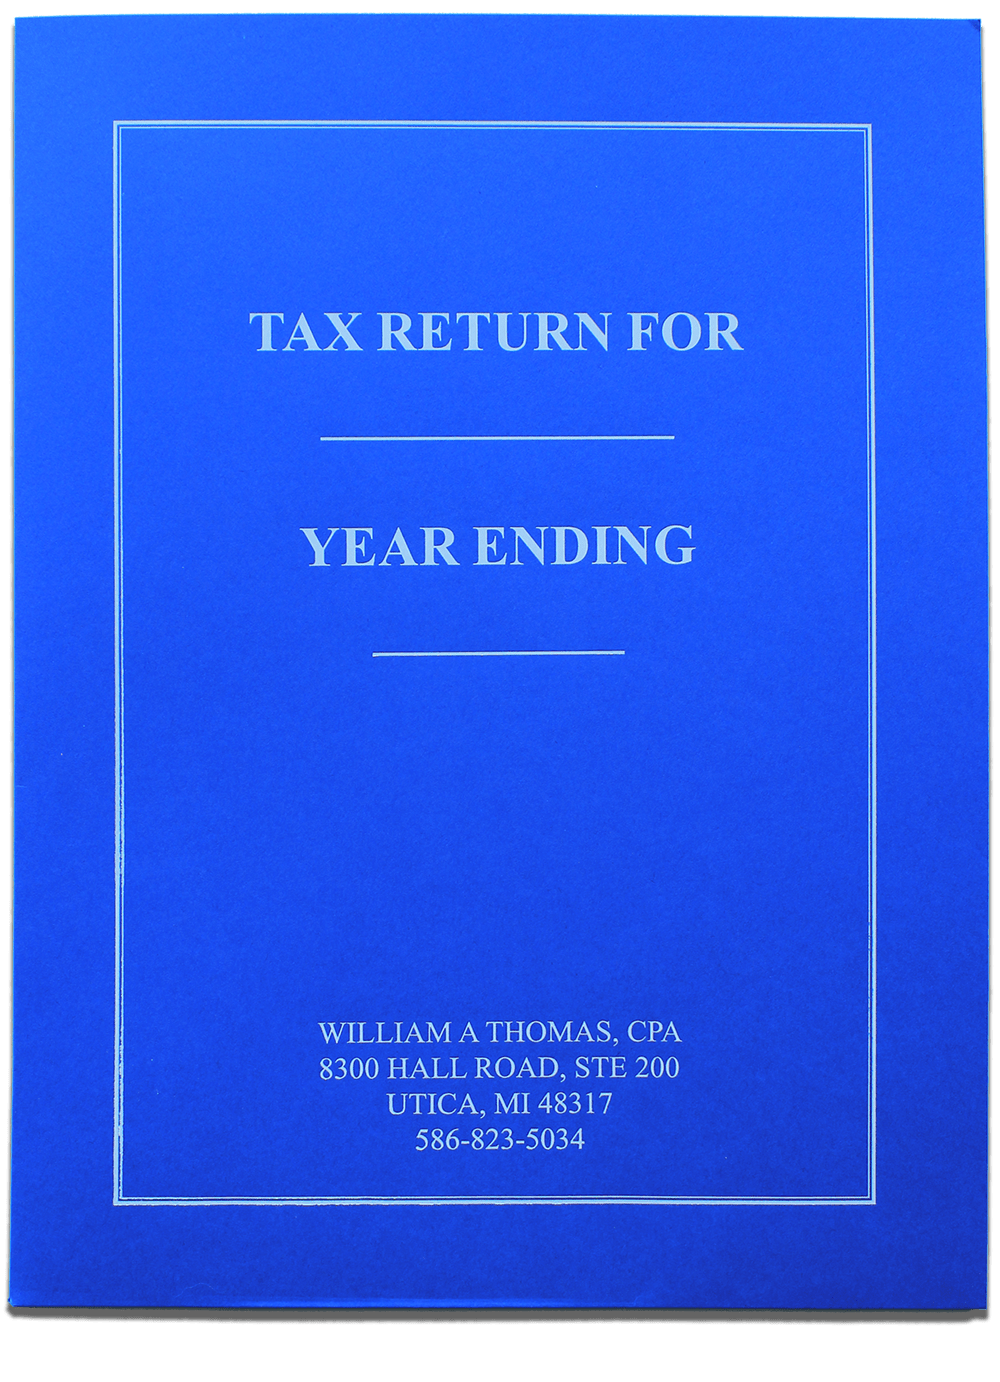 Customized Tax Return Folders with Foil Stamping, Royal Blue Paper with White Foil, Write In Client Name and Tax Year - DiscountTaxForms.com